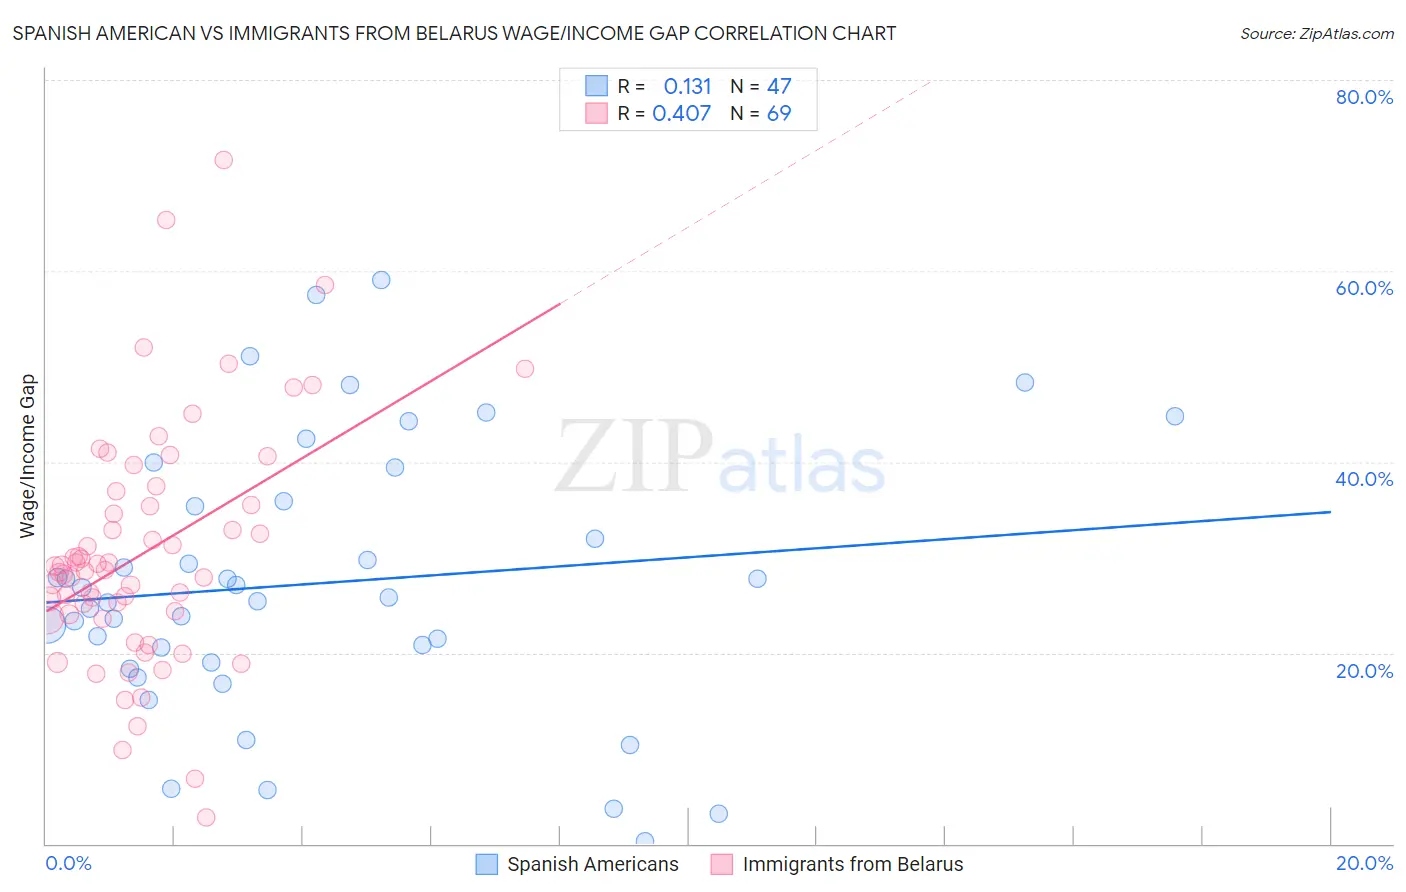 Spanish American vs Immigrants from Belarus Wage/Income Gap